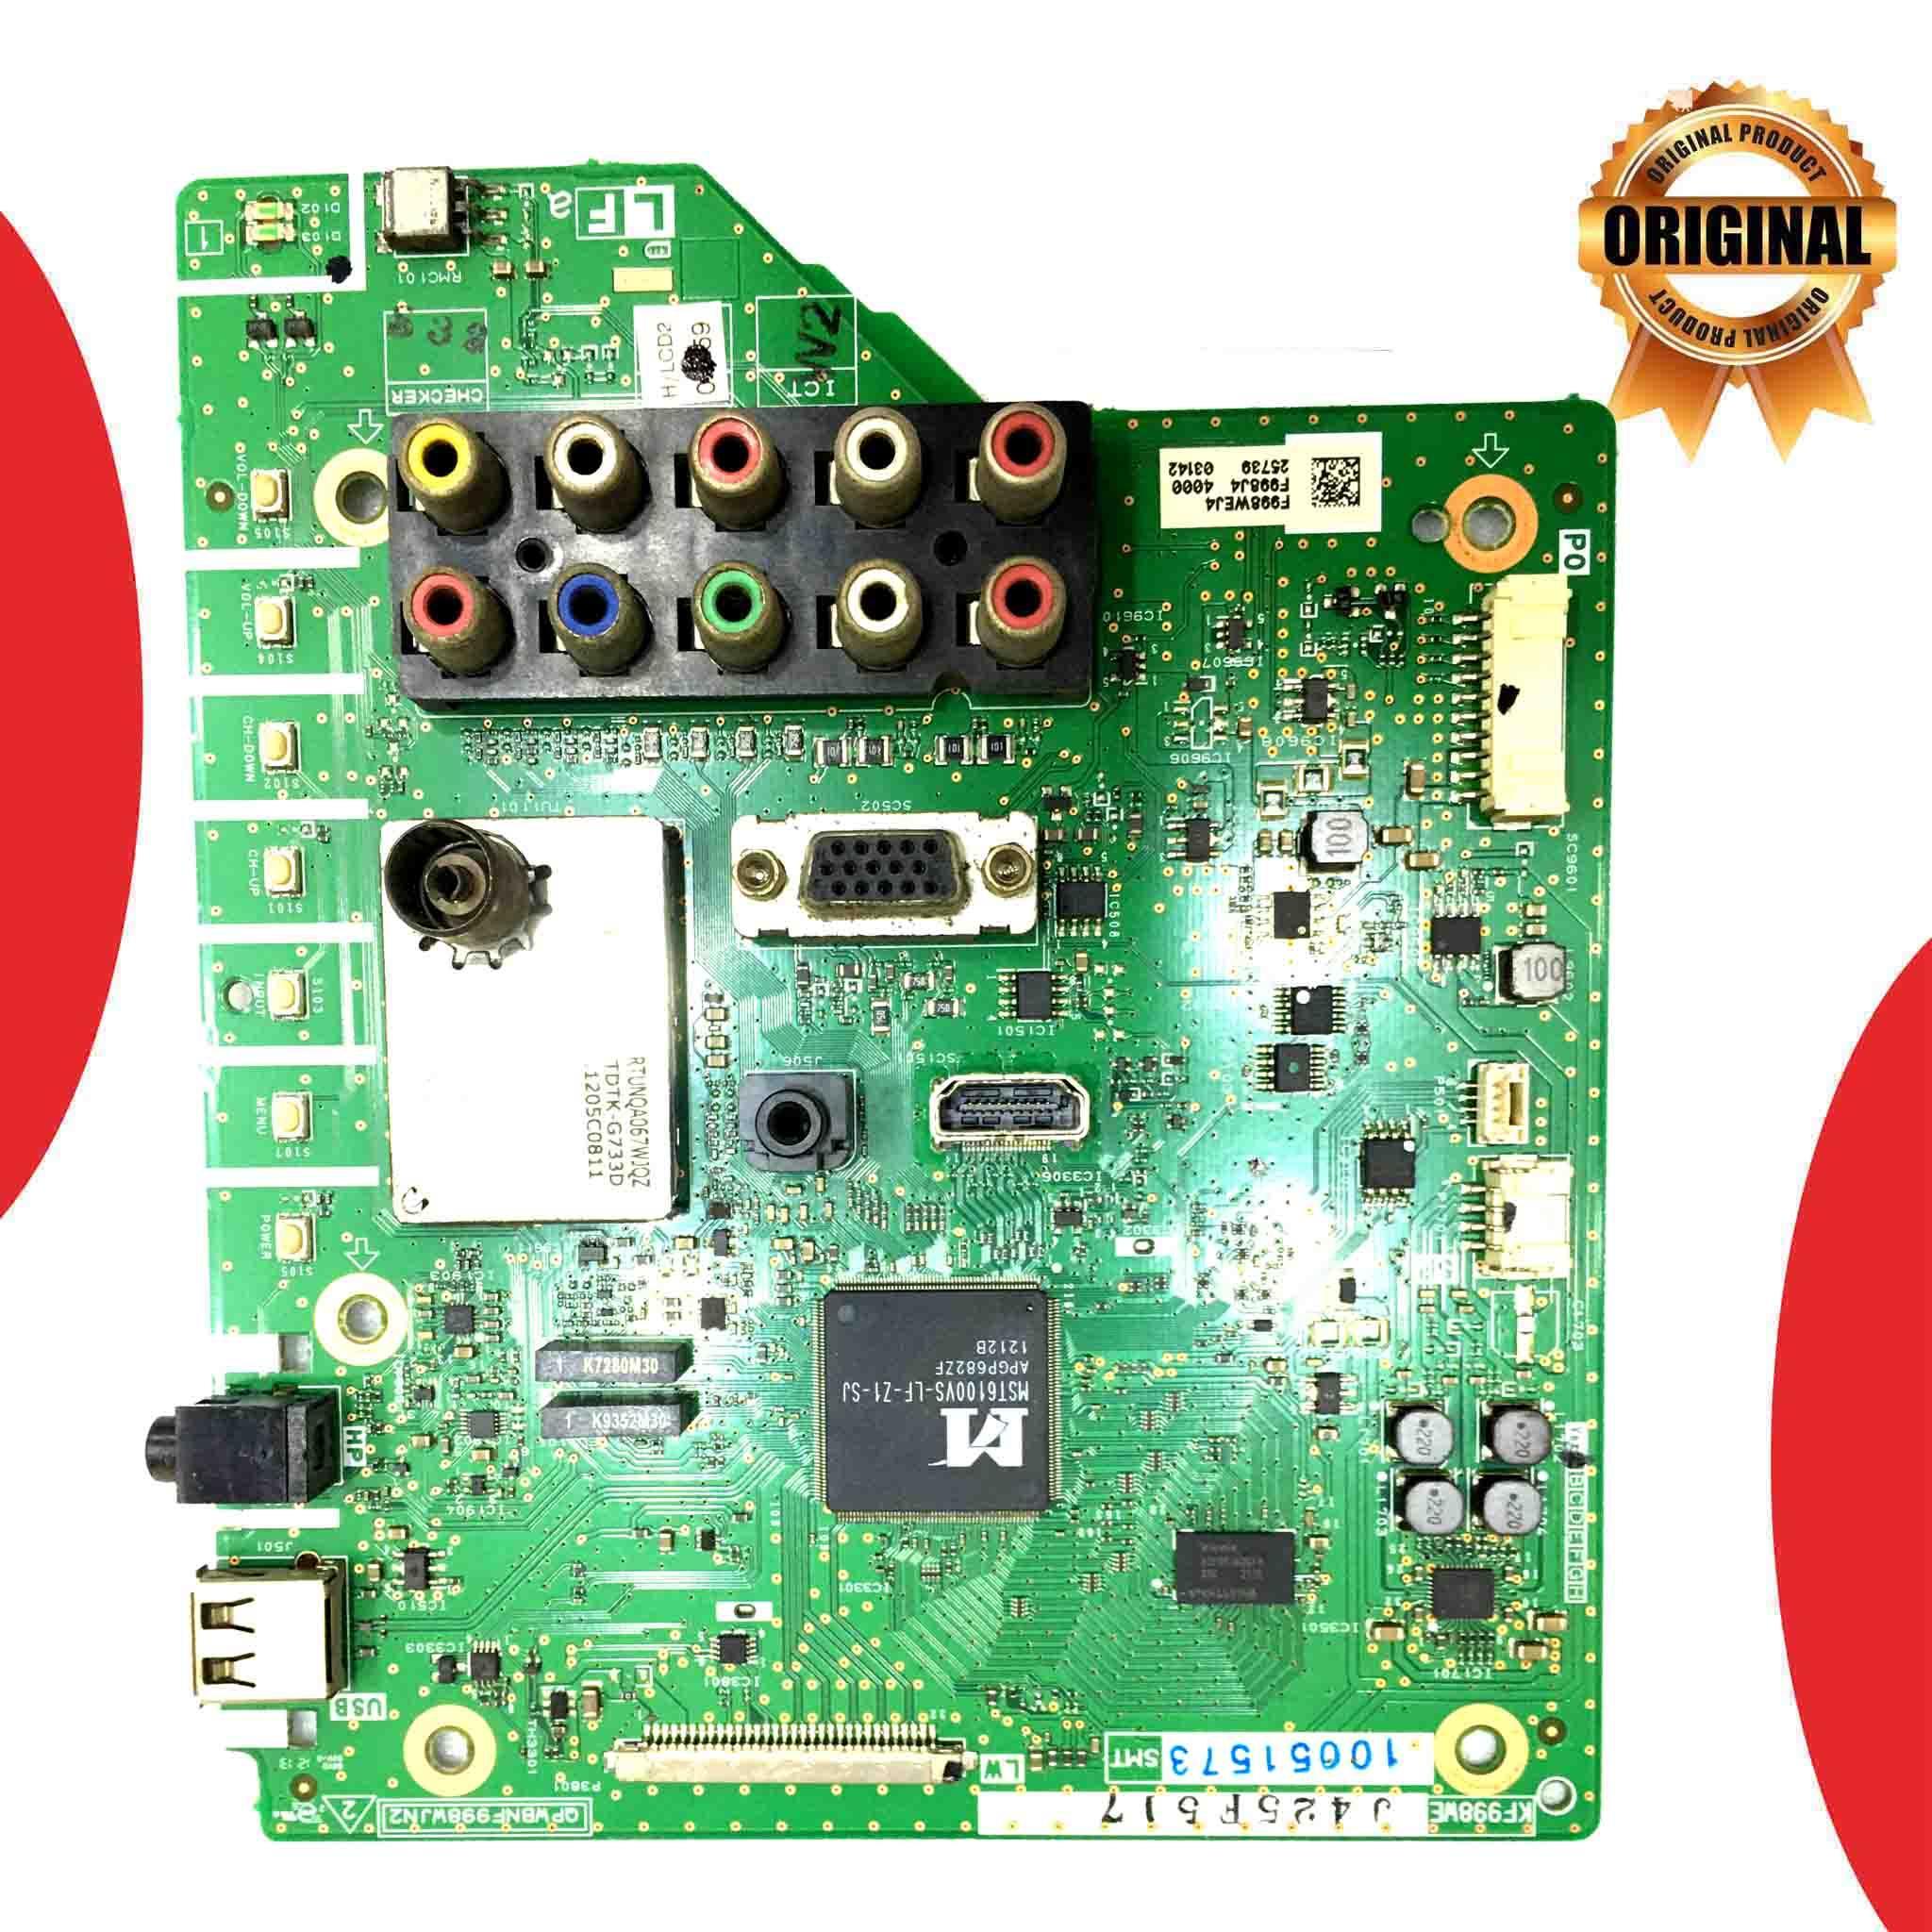 Sharp 32 inch LCD TV Motherboard for Model 32LE340 - Great Bharat Electronics